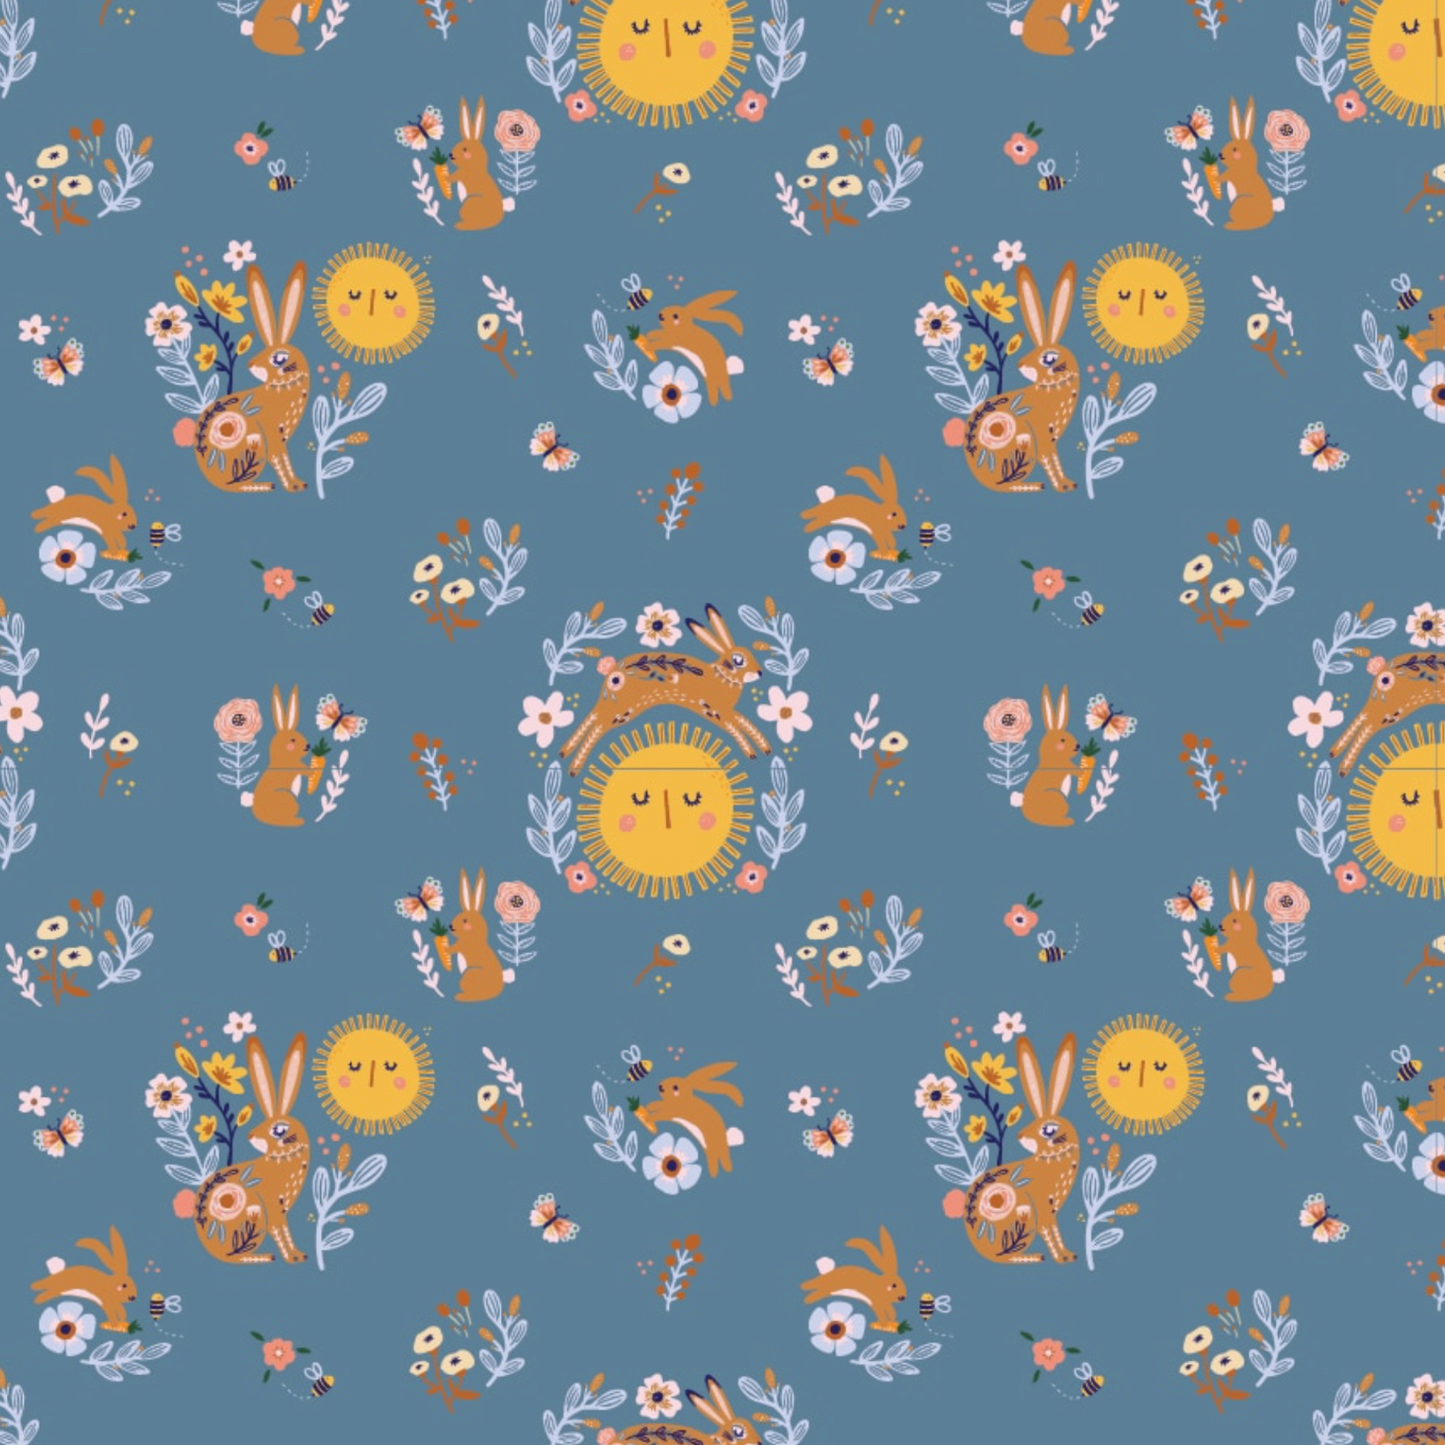 Hide and Seek Sunny Bunnies Blue HS23413, sold by the 1/2 yard